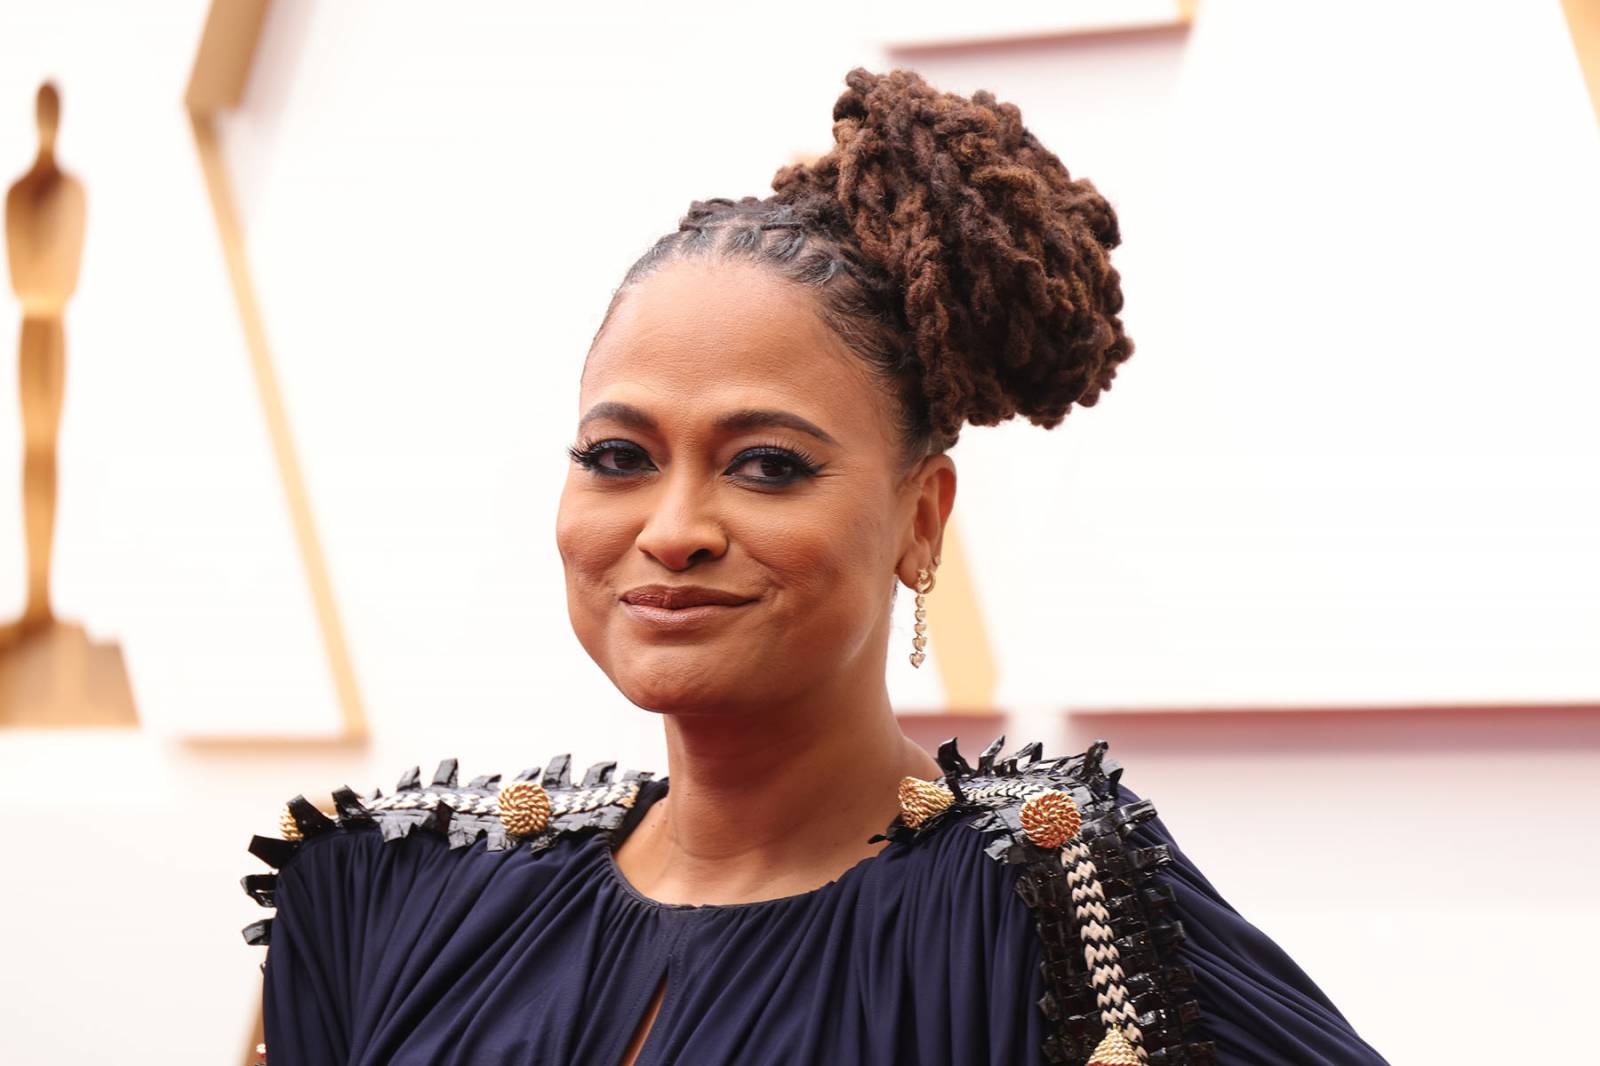 AvaDuVernay / (Fot. Getty Images)